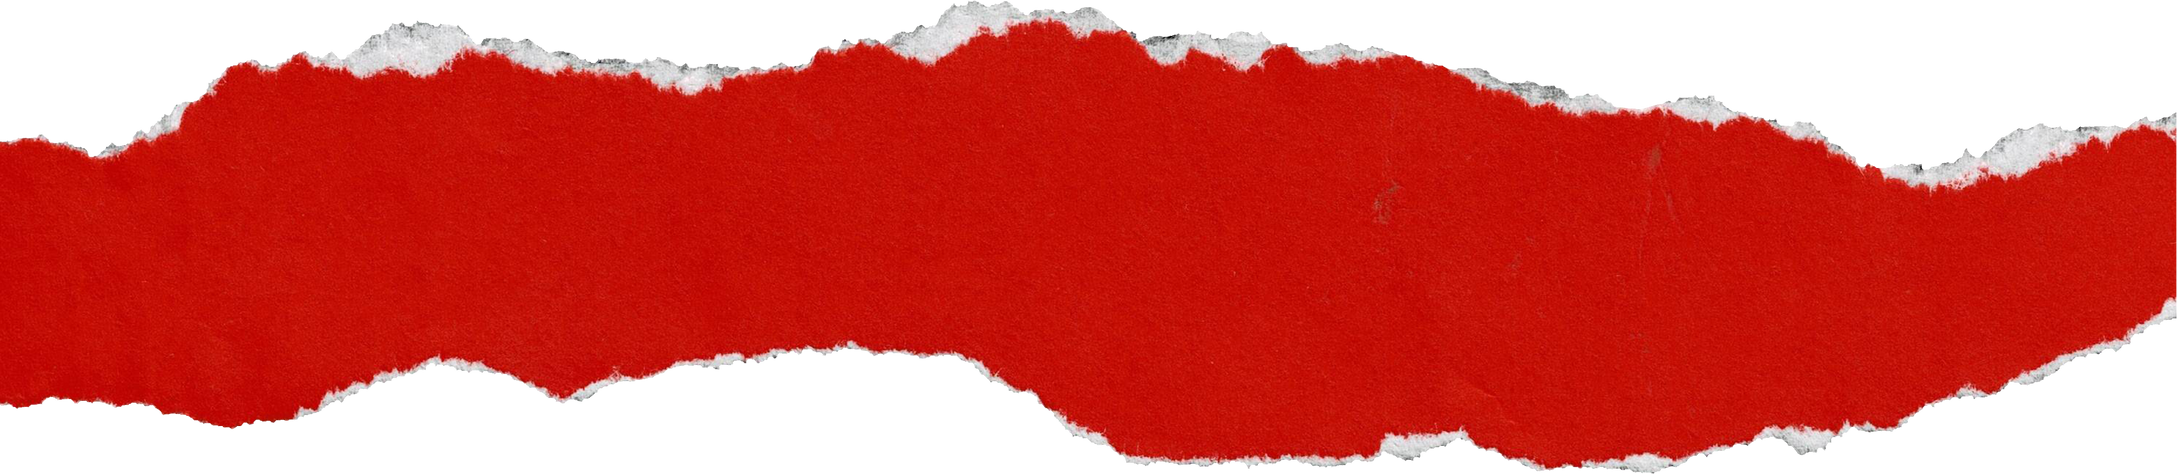 Red Ripped Paper